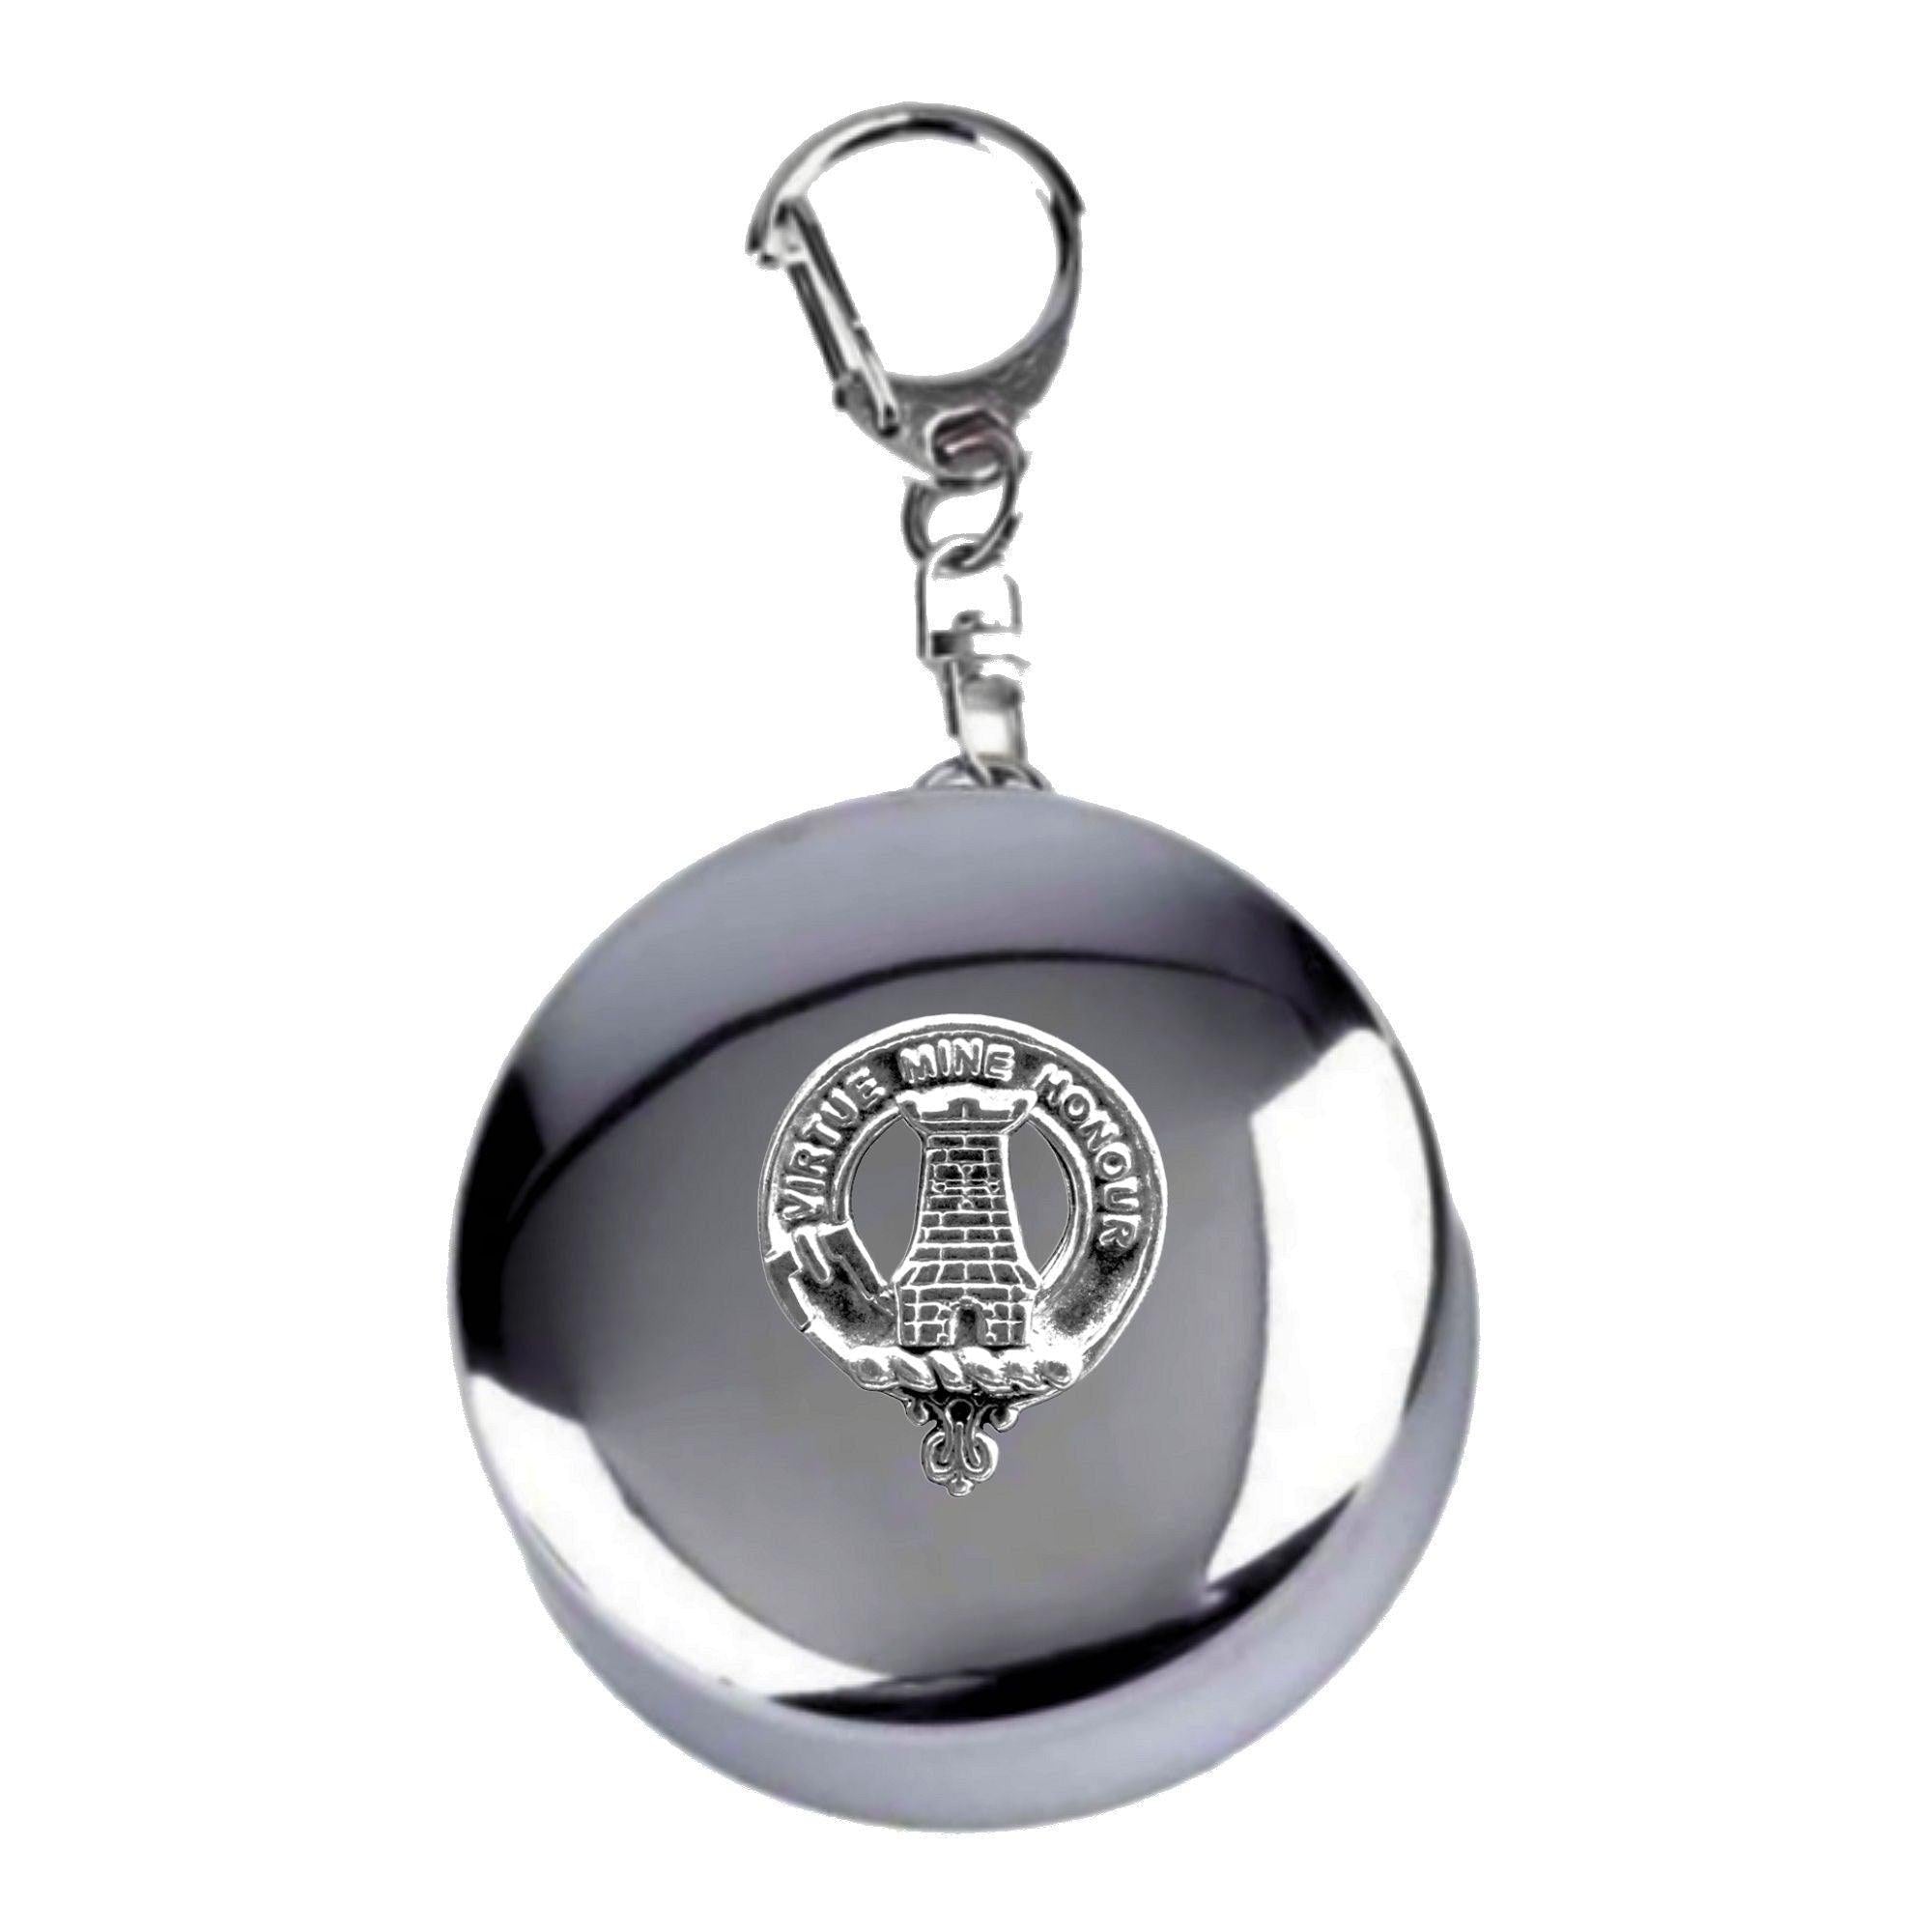 MacLean Scottish Clan Crest Folding Cup Key Chain